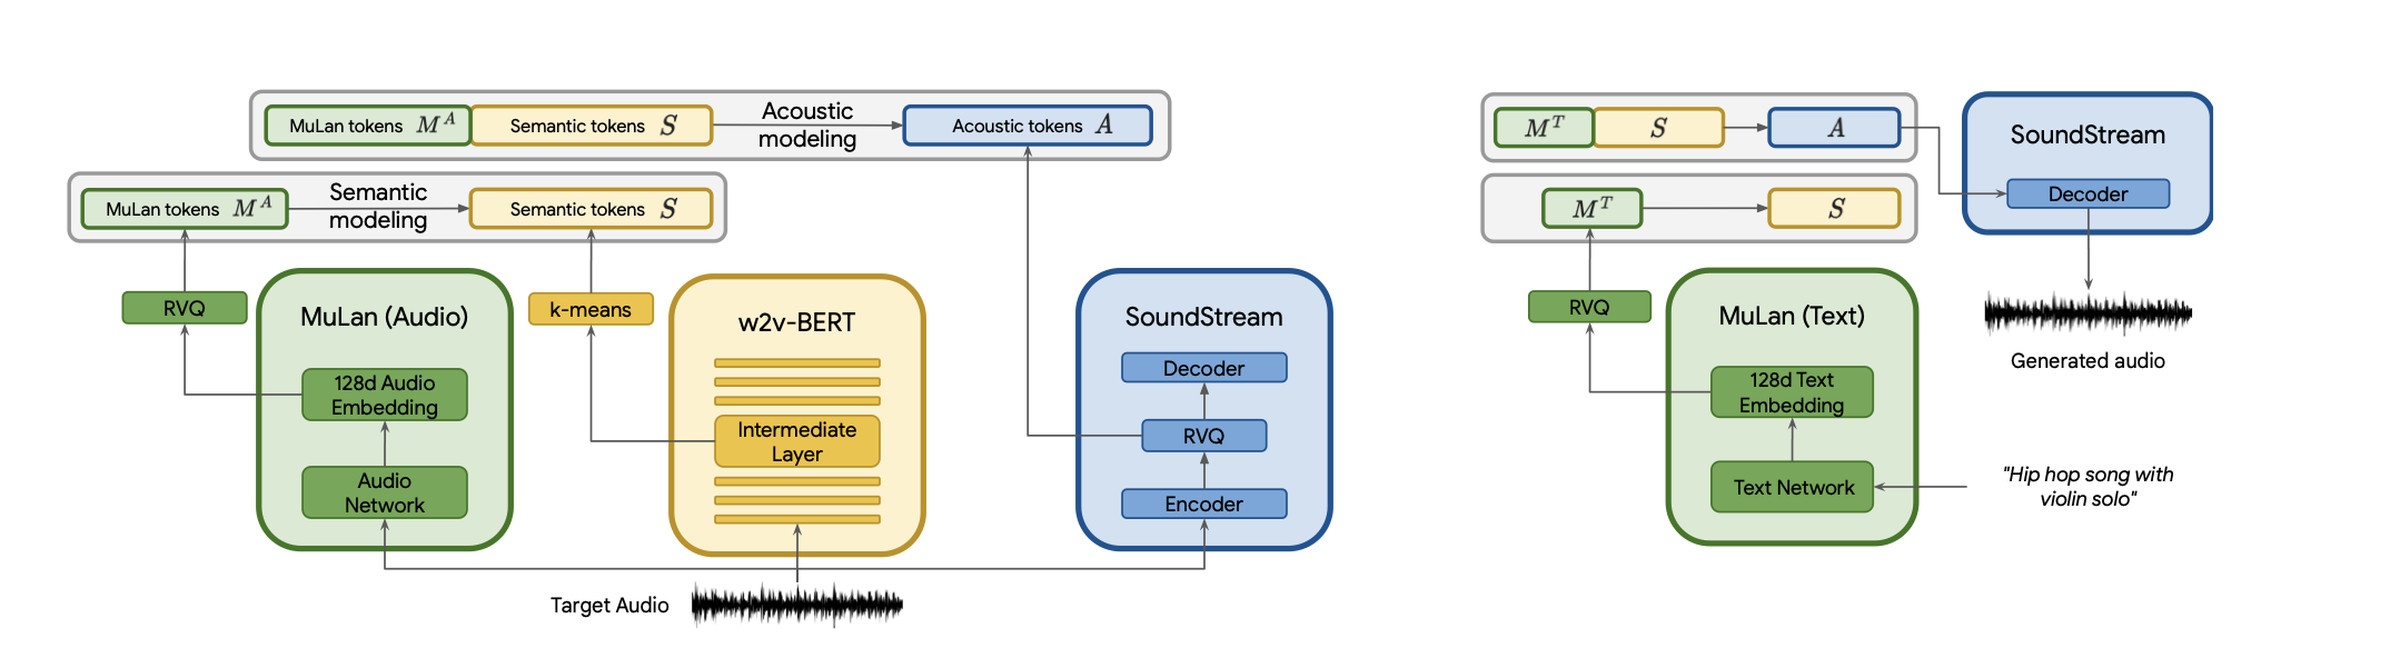 Figure showing part of the MusicLM process involving SoundStream, w2v-BERT and MuLan.